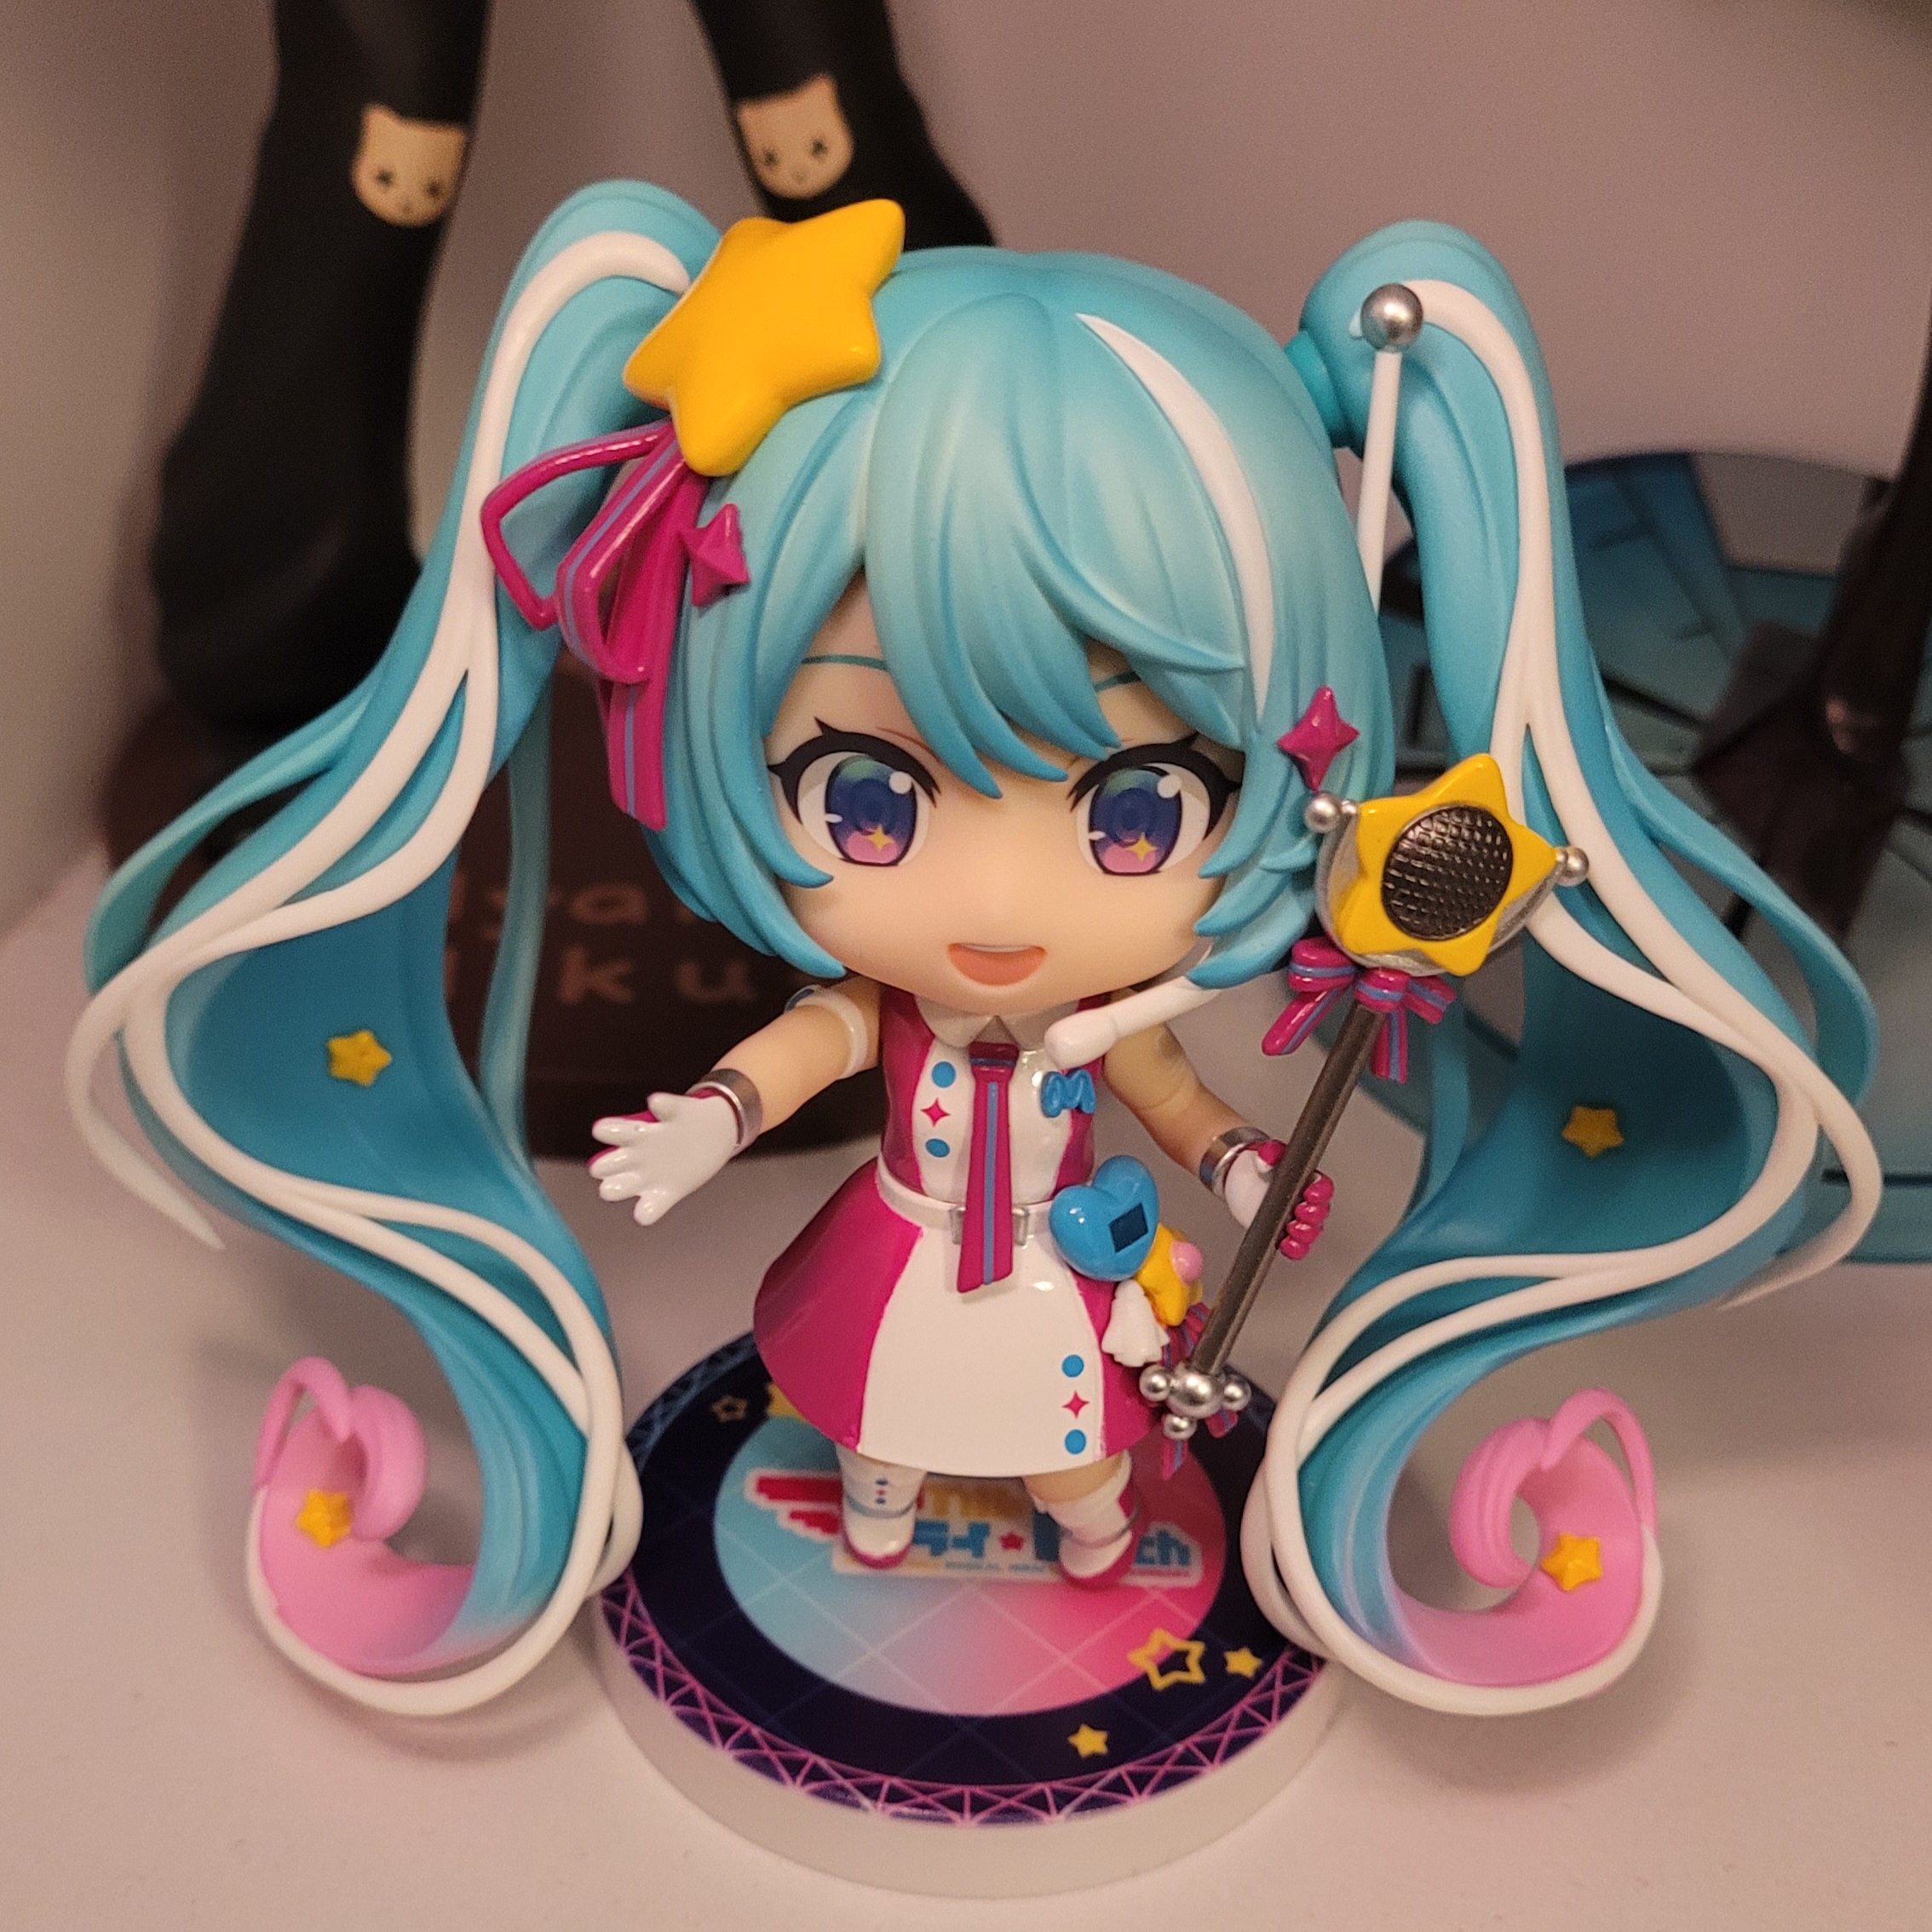 a photo of the Magical Mirai 10th Anniversary Miku Nendoroid. She wears a magenta and white dress with a magenta and white tie as well as a blue heart, yellow star, and magenta bow attached to her hip on her belt. She has long blue twintails that turn pink near the bottom and also have white streaks. She wears a large yellow star with a magenta bow attached on her left pigtail. She is also wearing a white headset that has a long white antenna with a silver top on the right side of her head. She's holding a star baton with a magenta bow.